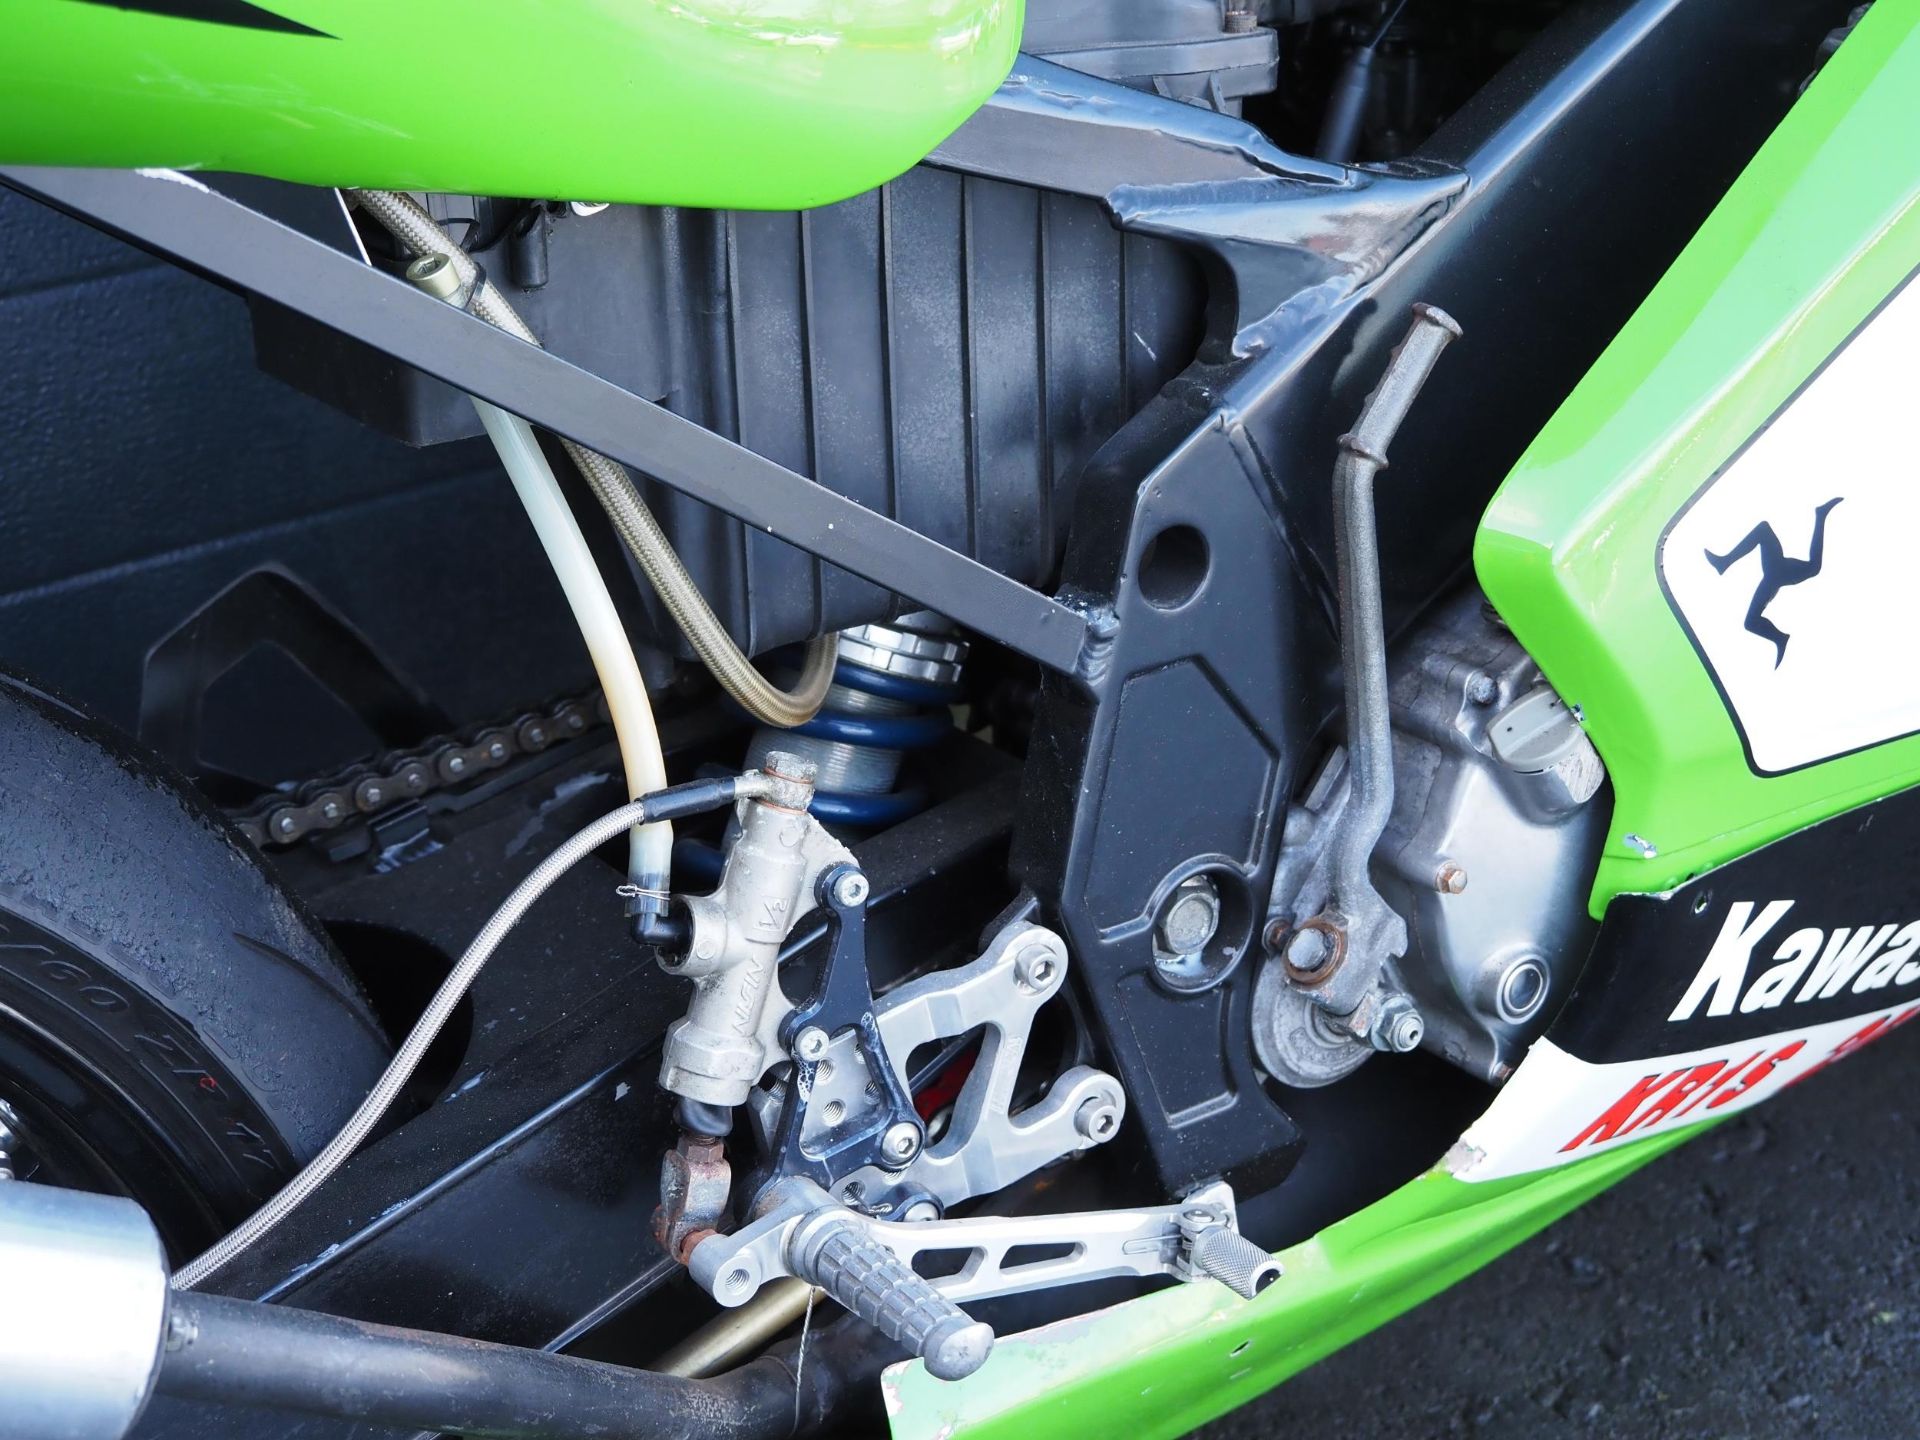 Kawasaki KR1-S 250 F2 motorcycle. 1992 This bike was ridden by Billy Redmayne at the 2015 Classic F2 - Bild 6 aus 8